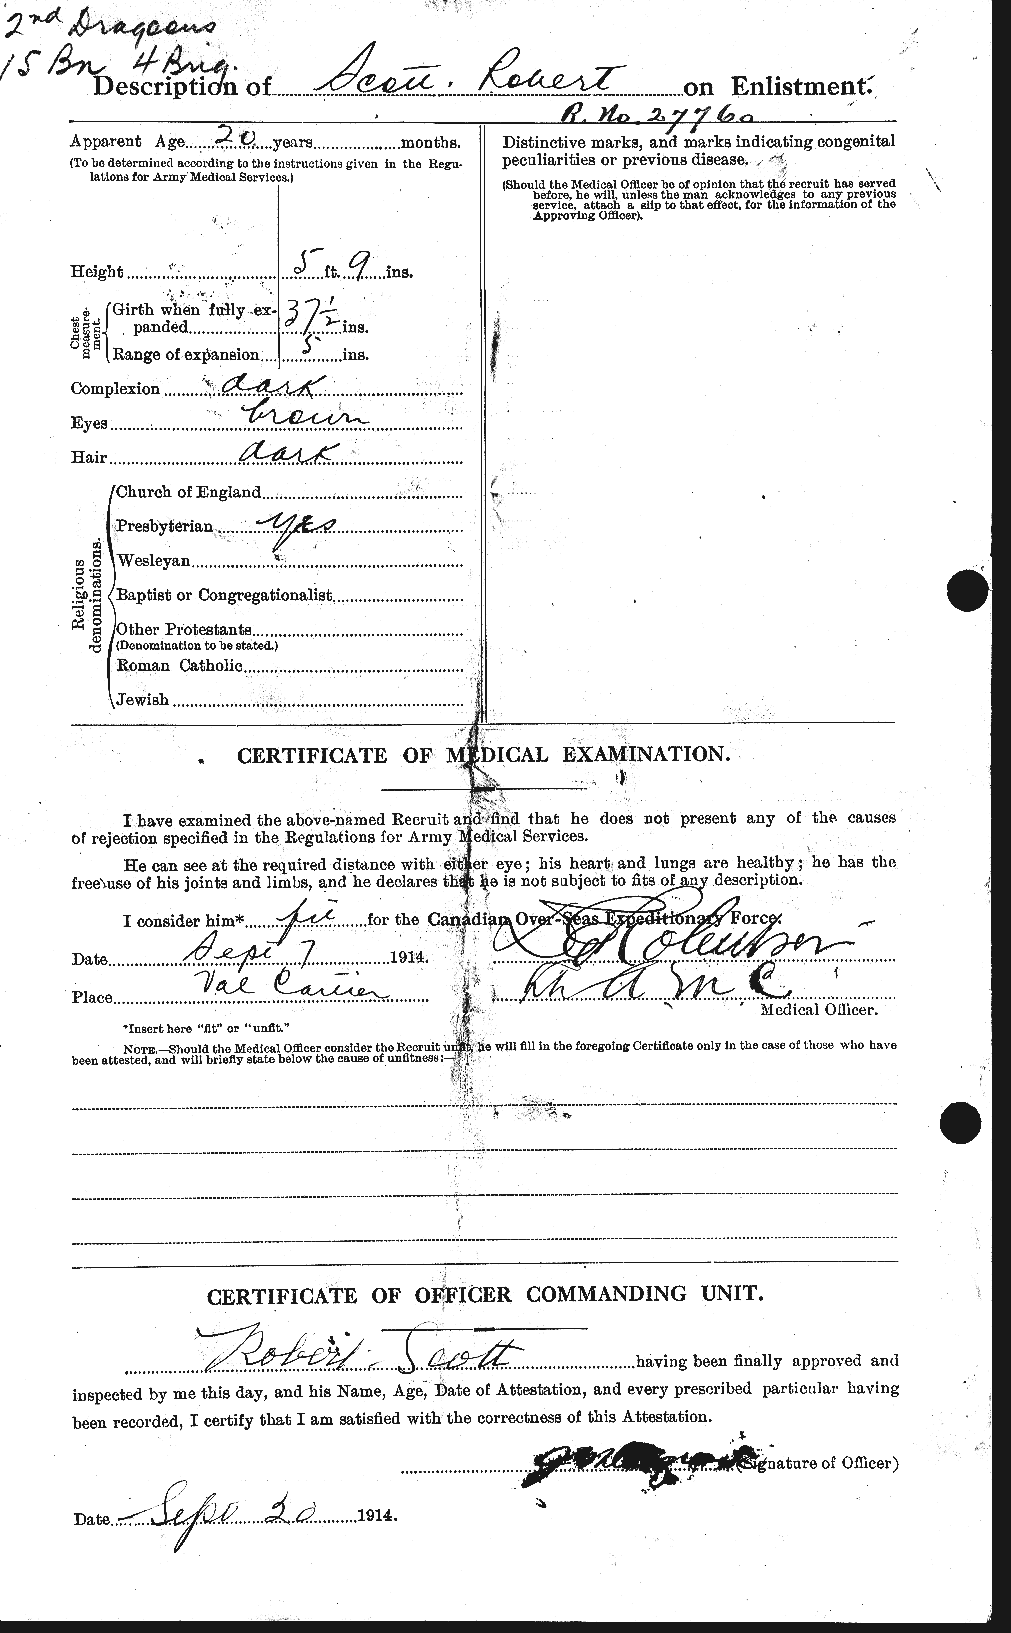 Personnel Records of the First World War - CEF 089253b